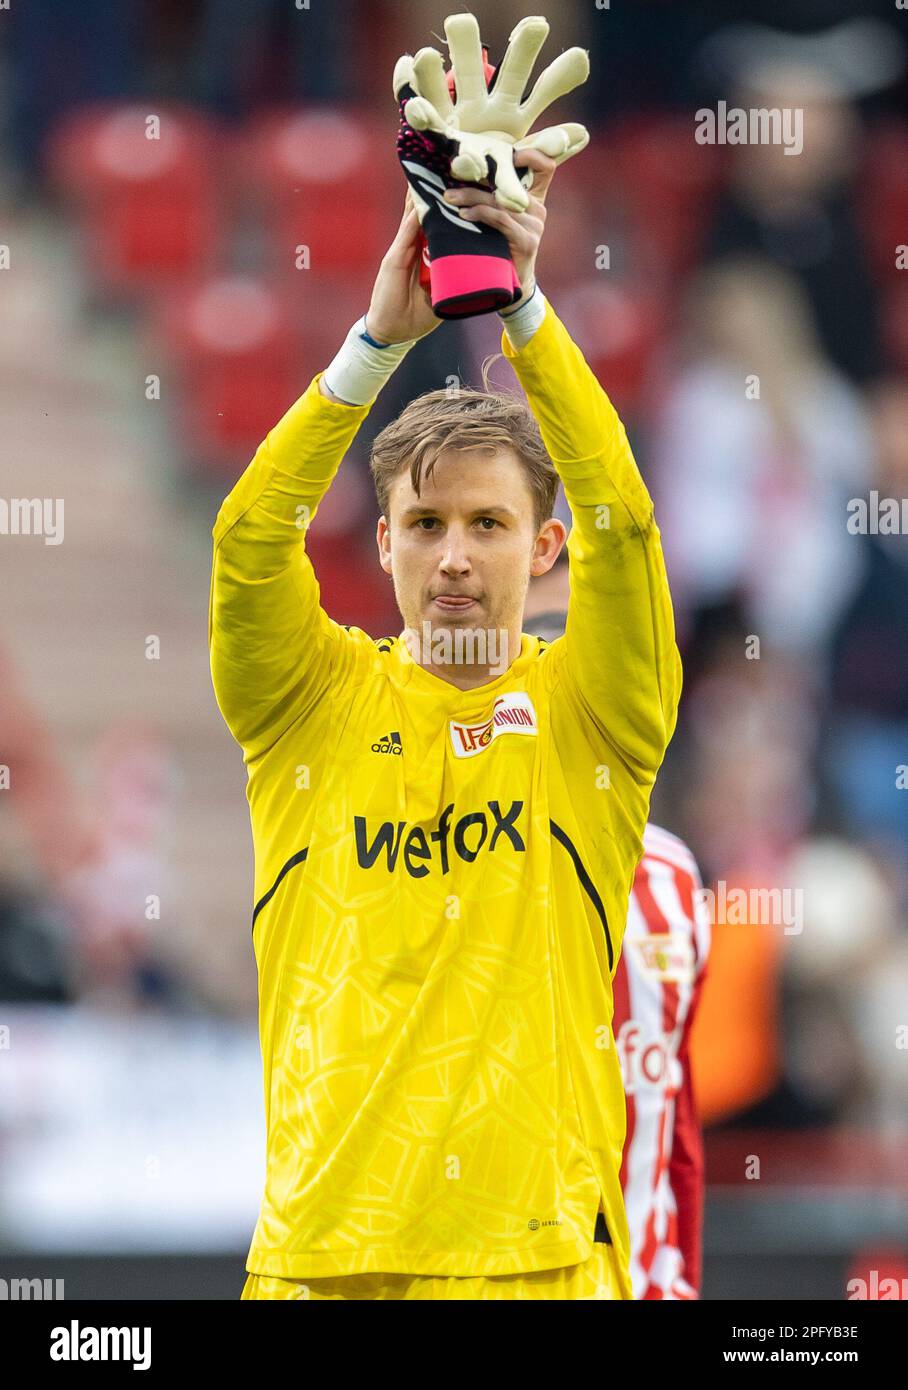 Berlin, Germany. 19th Mar, 2023. Soccer: Bundesliga, 1. FC Union Berlin - Eintracht Frankfurt, Matchday 25, An der Alten Försterei. Union goalkeeper Frederik Rönnow thanks the crowd after the win. Credit: Andreas Gora/dpa - IMPORTANT NOTE: In accordance with the requirements of the DFL Deutsche Fußball Liga and the DFB Deutscher Fußball-Bund, it is prohibited to use or have used photographs taken in the stadium and/or of the match in the form of sequence pictures and/or video-like photo series./dpa/Alamy Live News Stock Photo